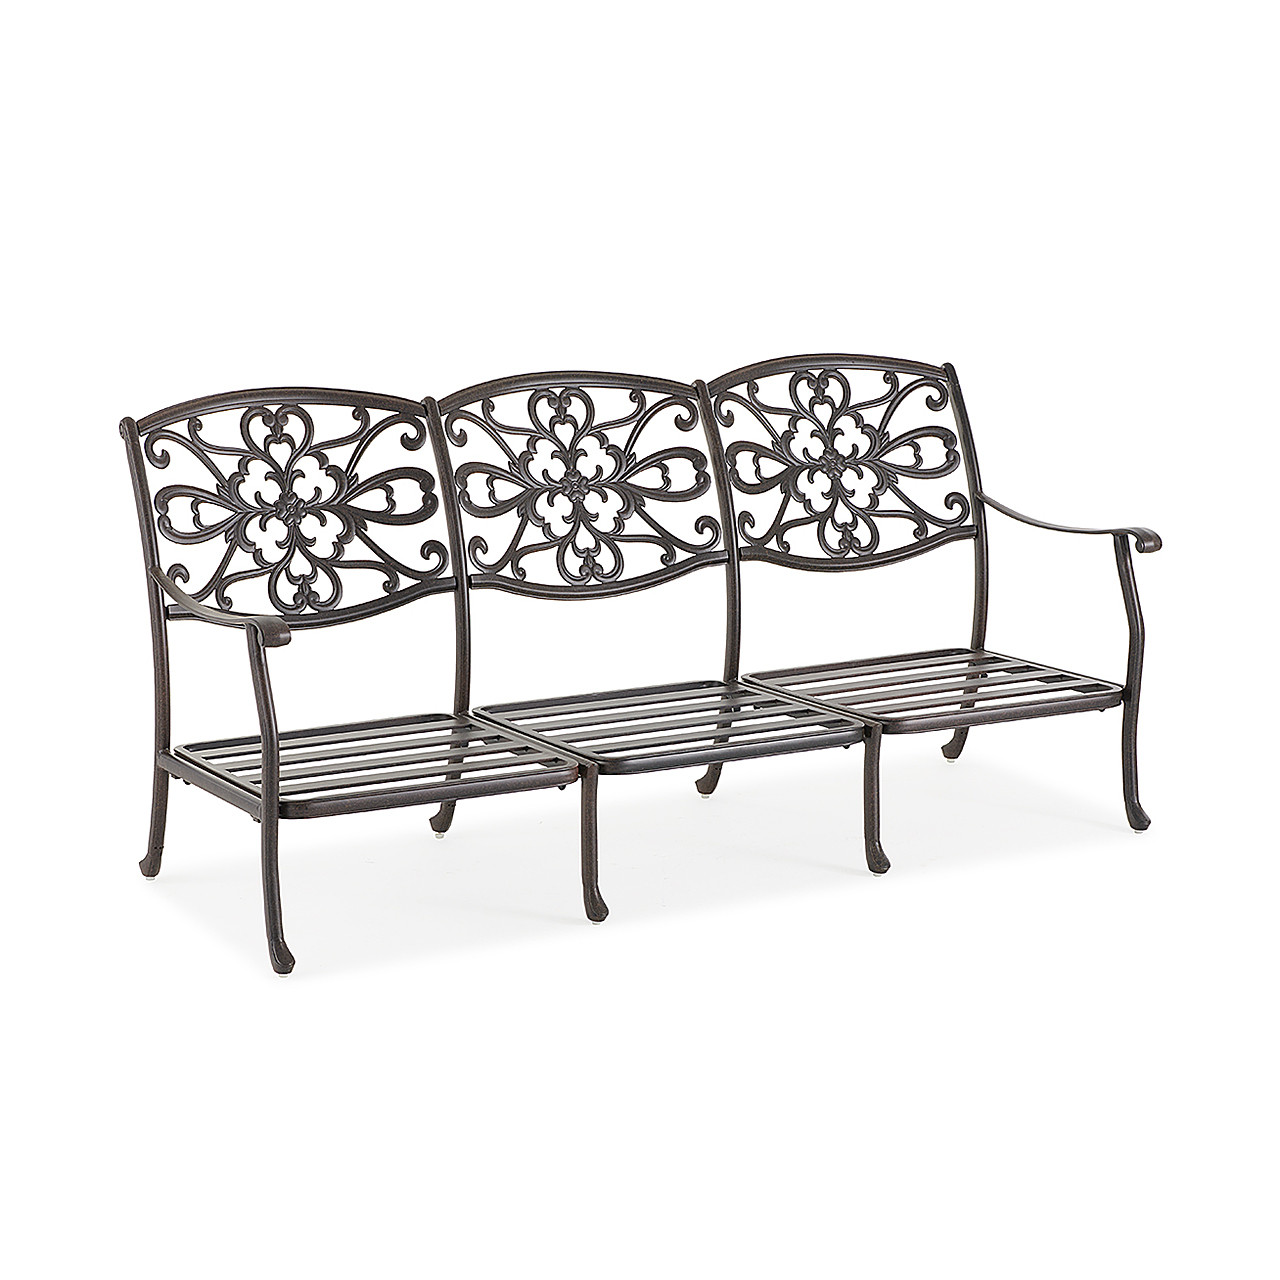 Carlisle Aged Bronze Cast Aluminum and Cast Pumice Cushion 4 Pc. Sofa Group with 36 in. D Fire Pit Table